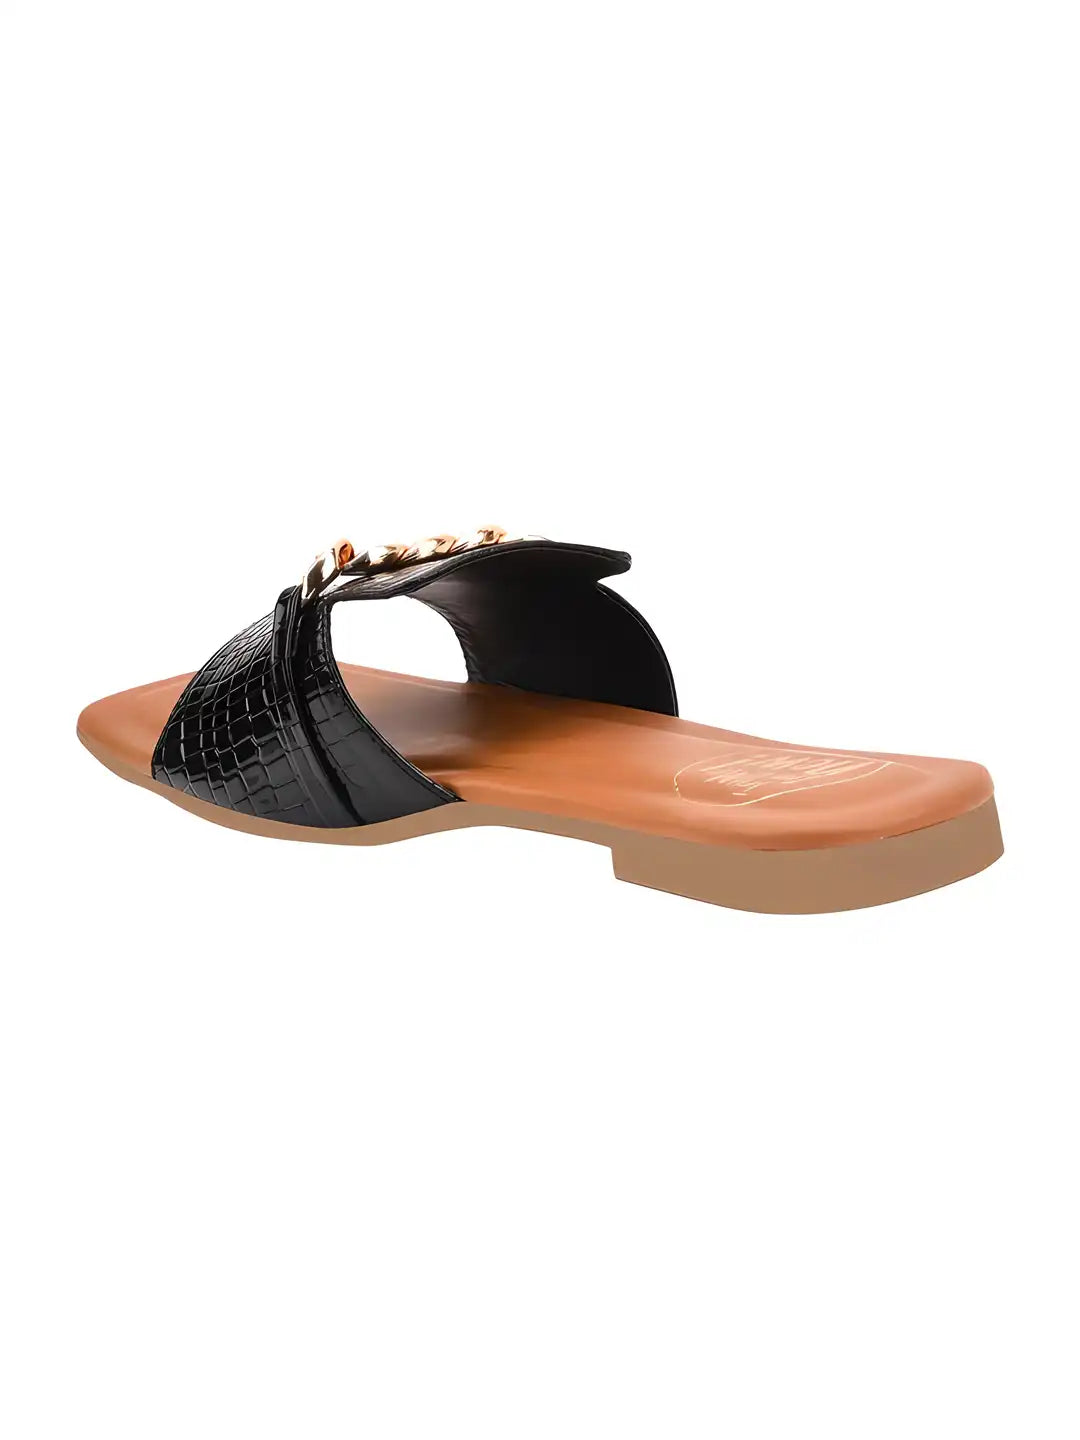 Comfortable And Stylish Flat Sandal For Women's